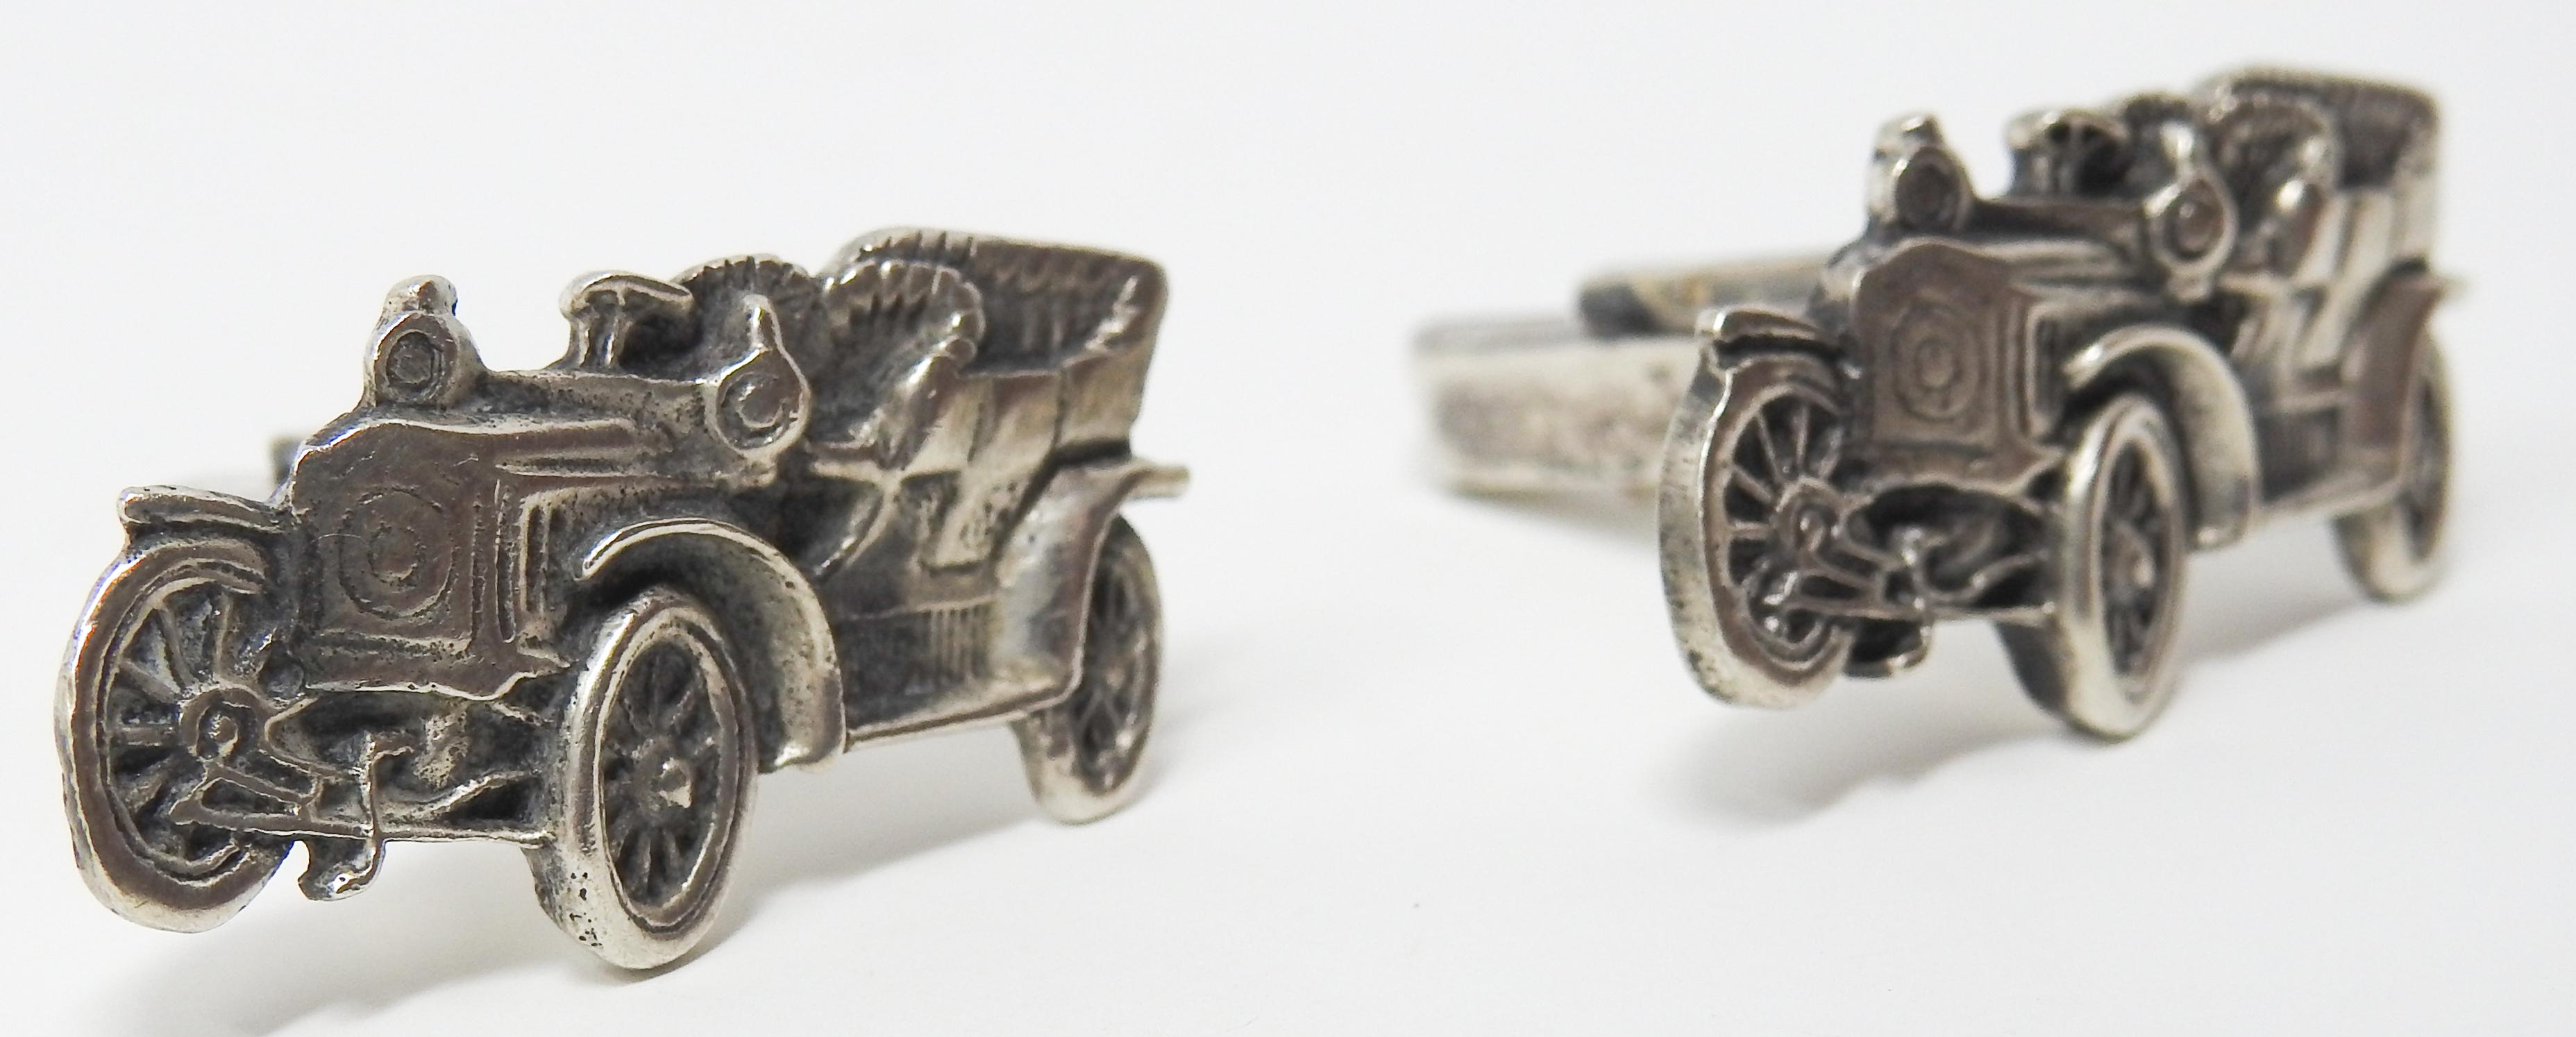 Offering this pair of handsome Sterling Silver Vintage 1950s Fenwick and Sailors cufflinks of Antique 1920 Deco Automobile Cars. The backs are marked F&S, sterling, and is copyrighted. 